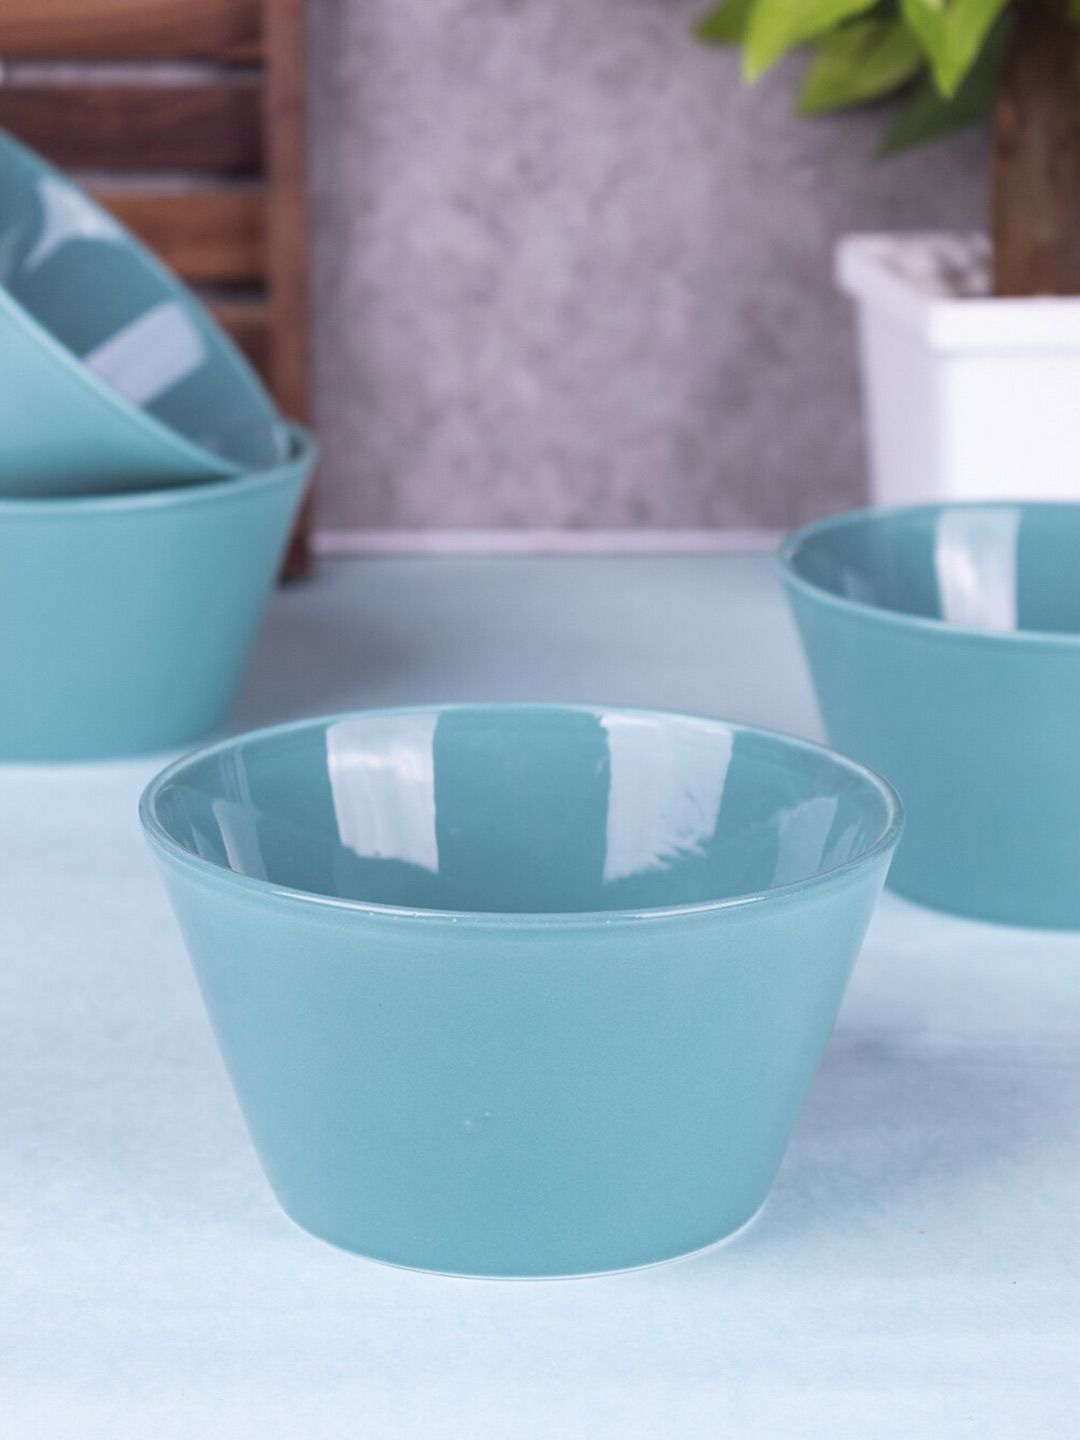 MARKET99 Turquoise Blue 4 Pieces Ceramic Glossy Bowls Price in India